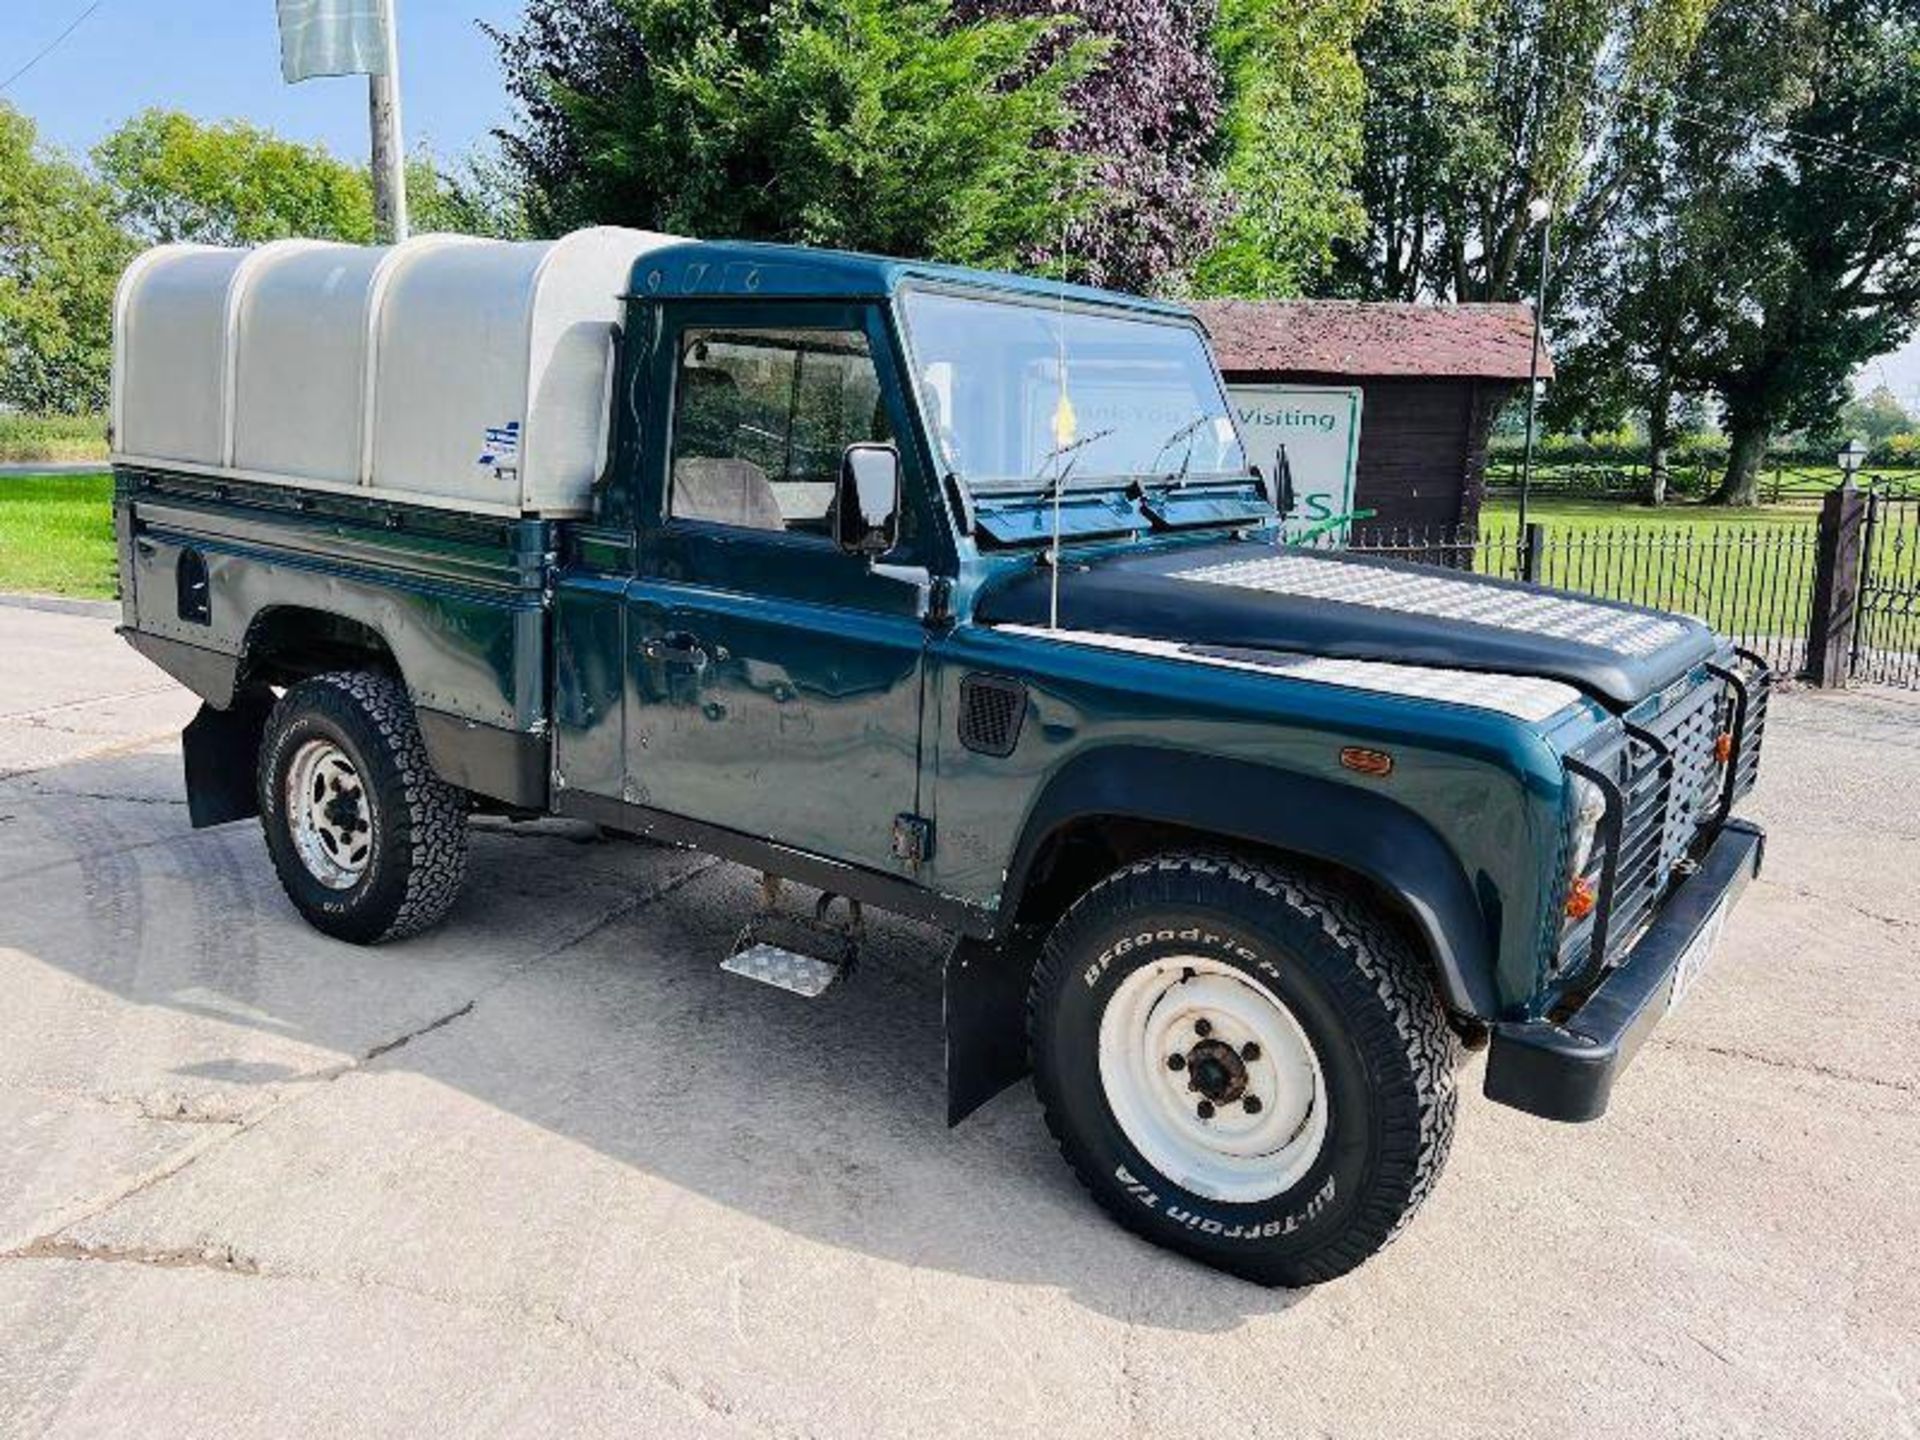 LAND ROVER 110 TD5 4WD PICK UP C/W CANOPY - 4WD - CANOPY - REAR TAIL GATE